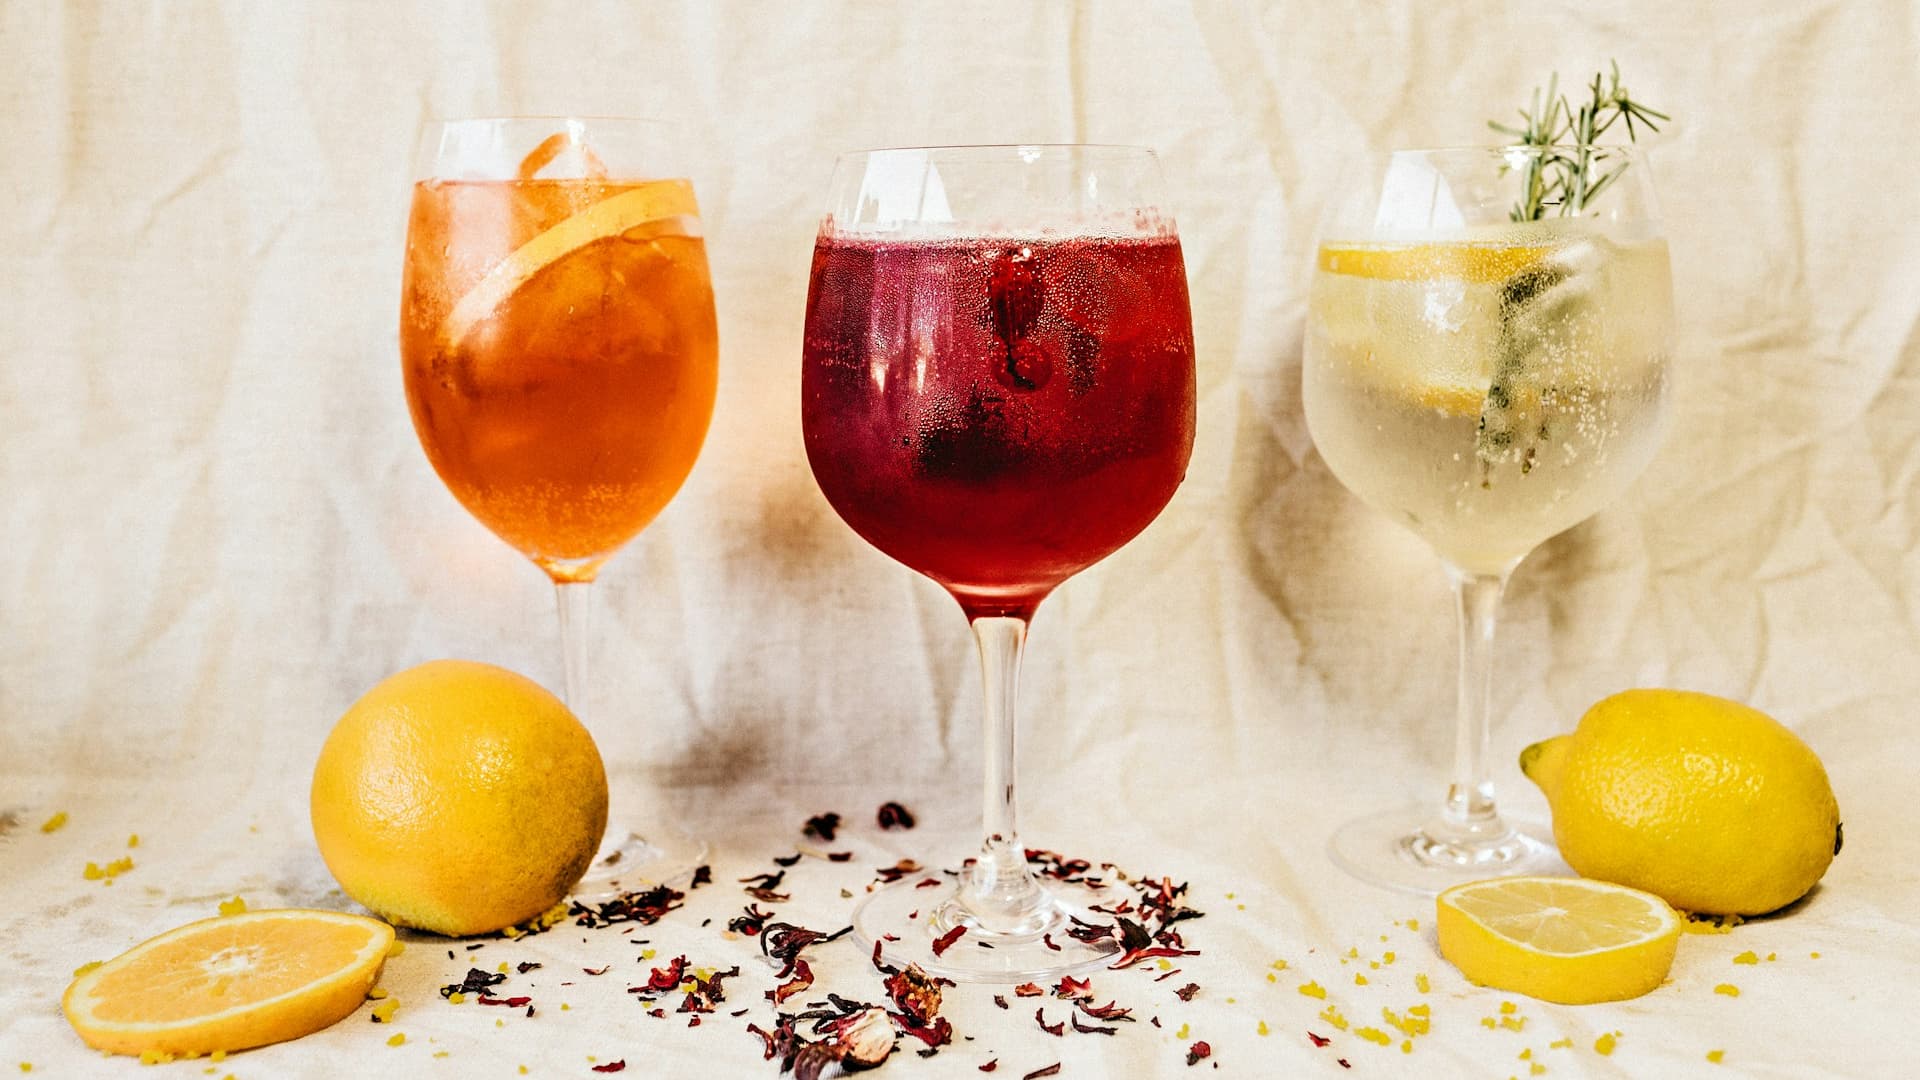 Three glasses with red, orange and clear drinks with ice and lemon slices in a white background